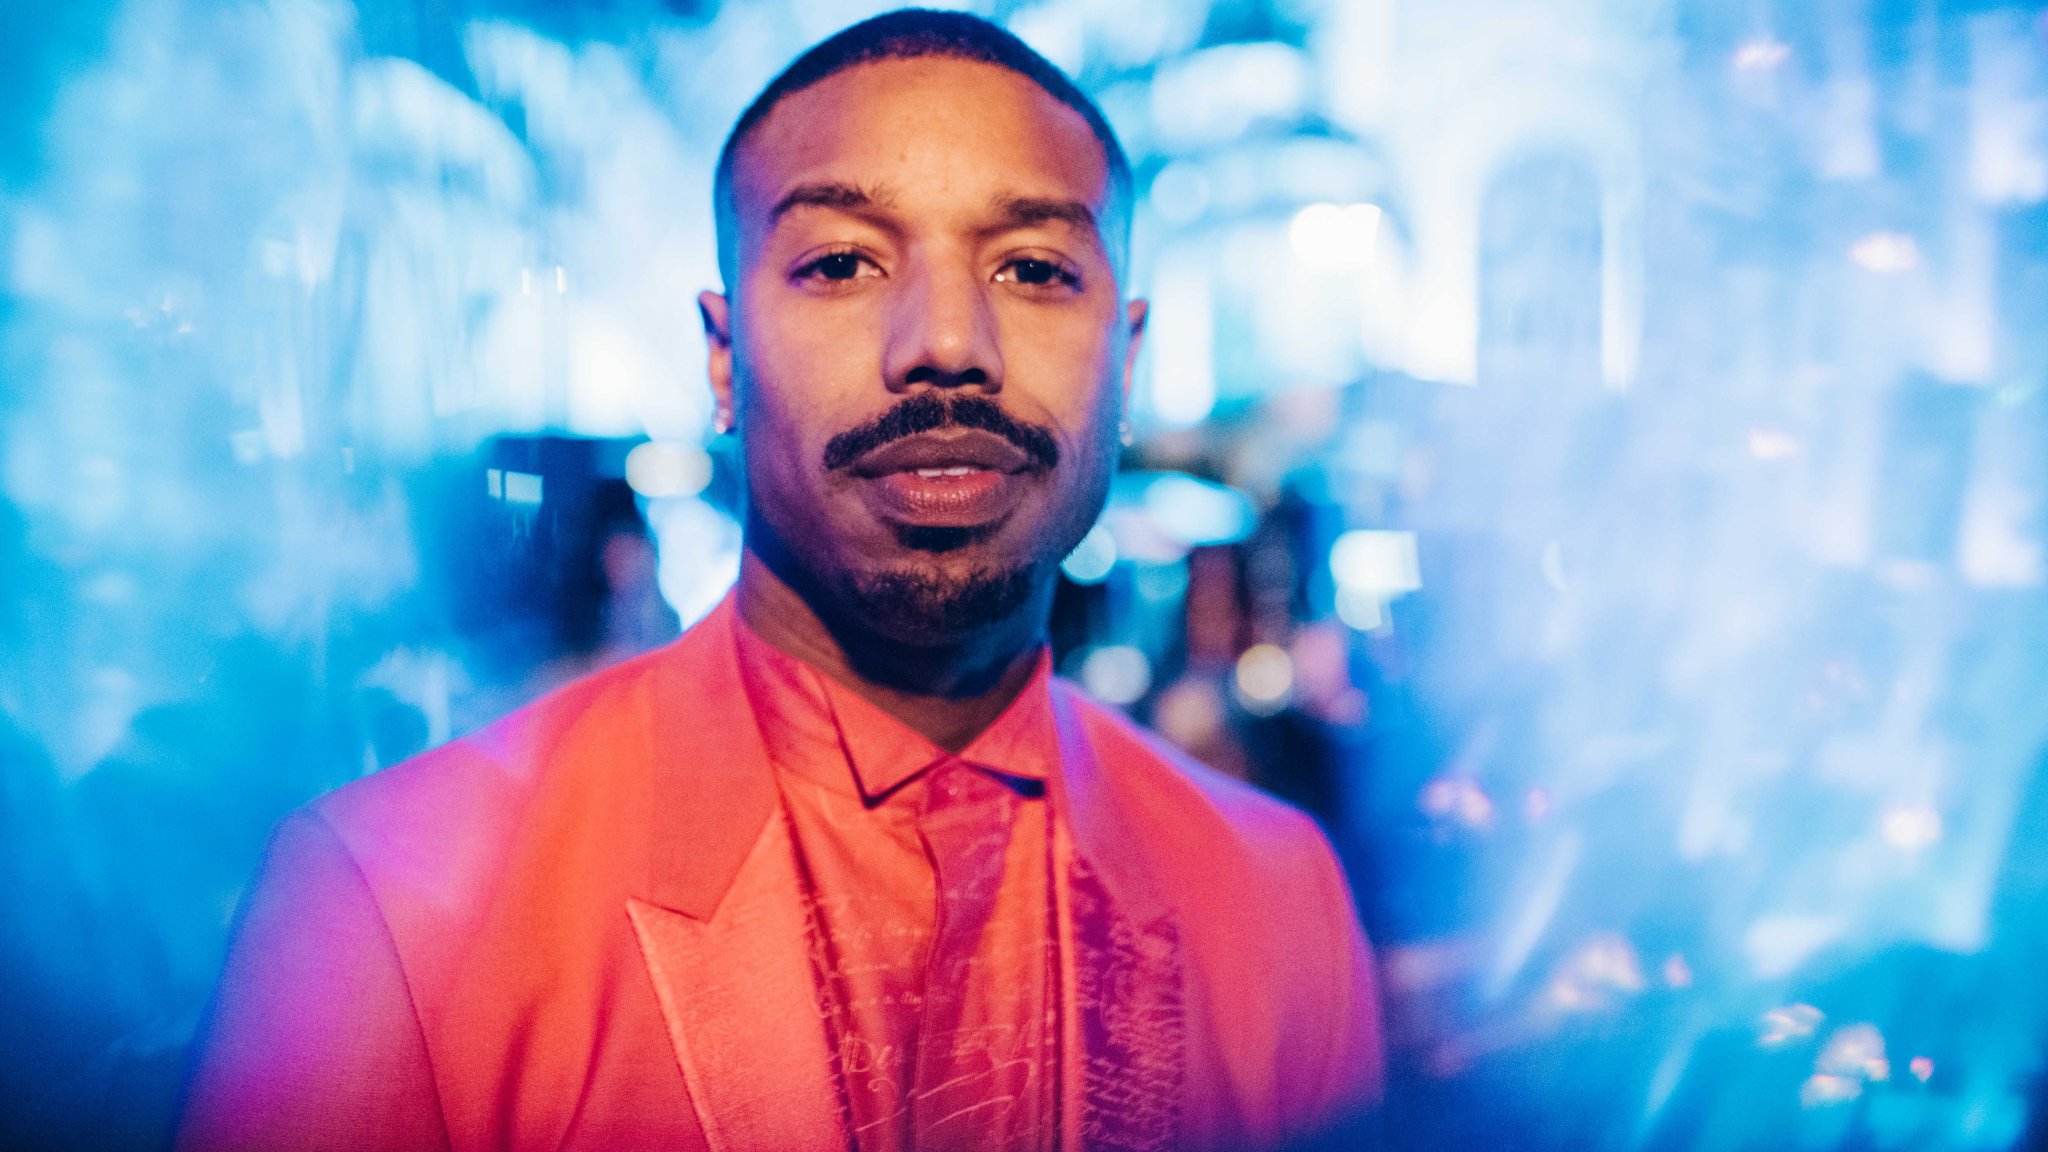 If Michael B. Jordan Was Alexa, We’d All Fall In Love With Our Smart Assistant